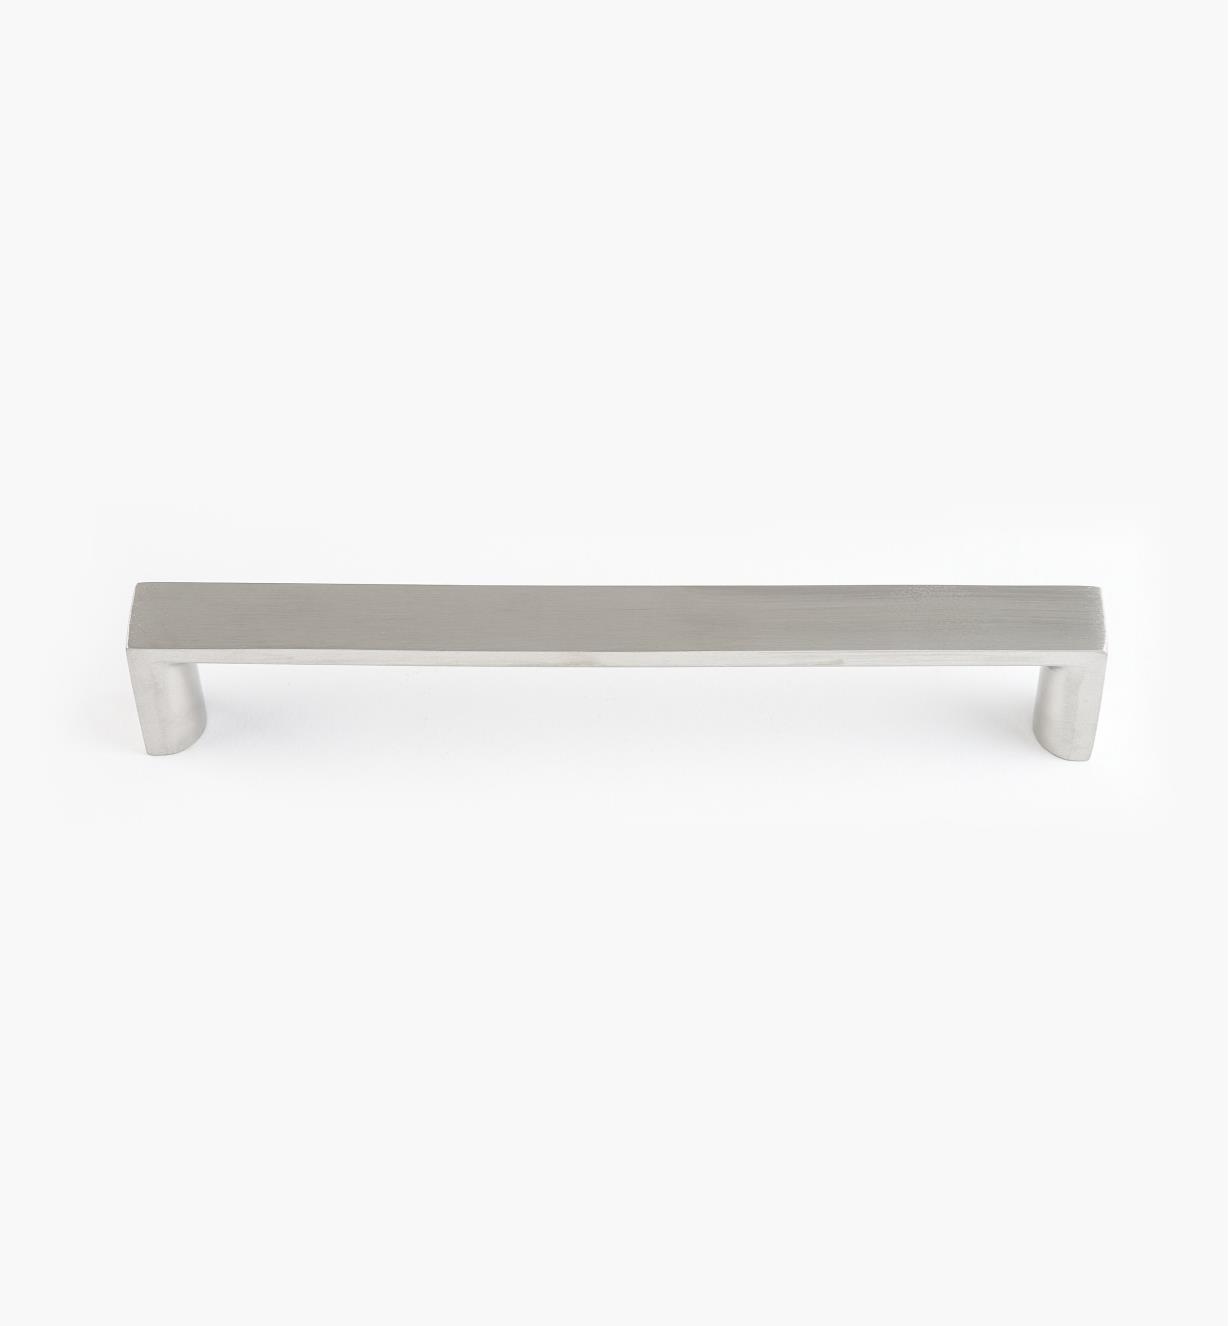 Stainless-Steel Flat-Face Handles - Lee Valley Tools Stainless Steel Flat Stock Near Me